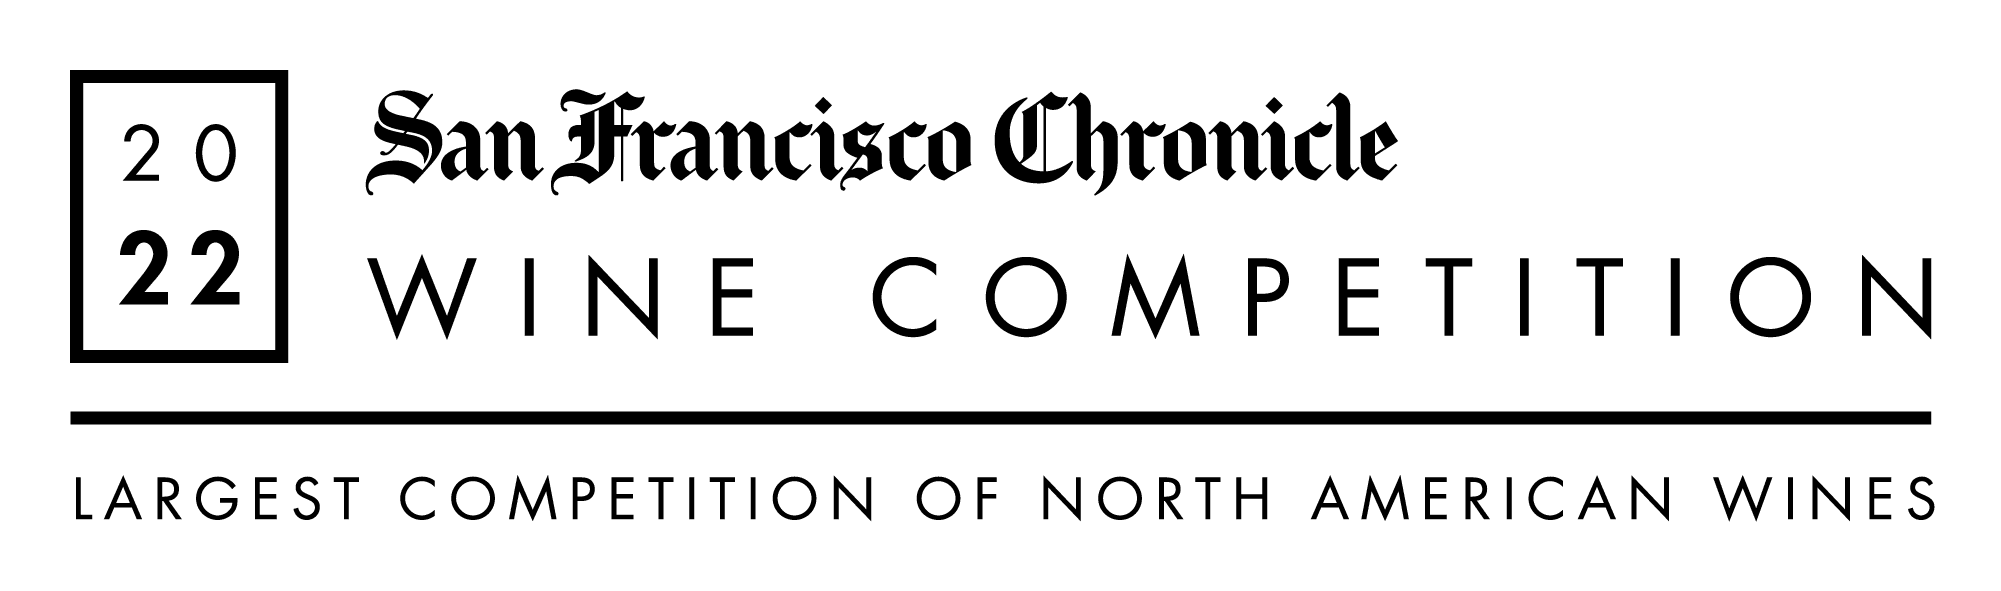 San Francisco Chronicle Wine Competion